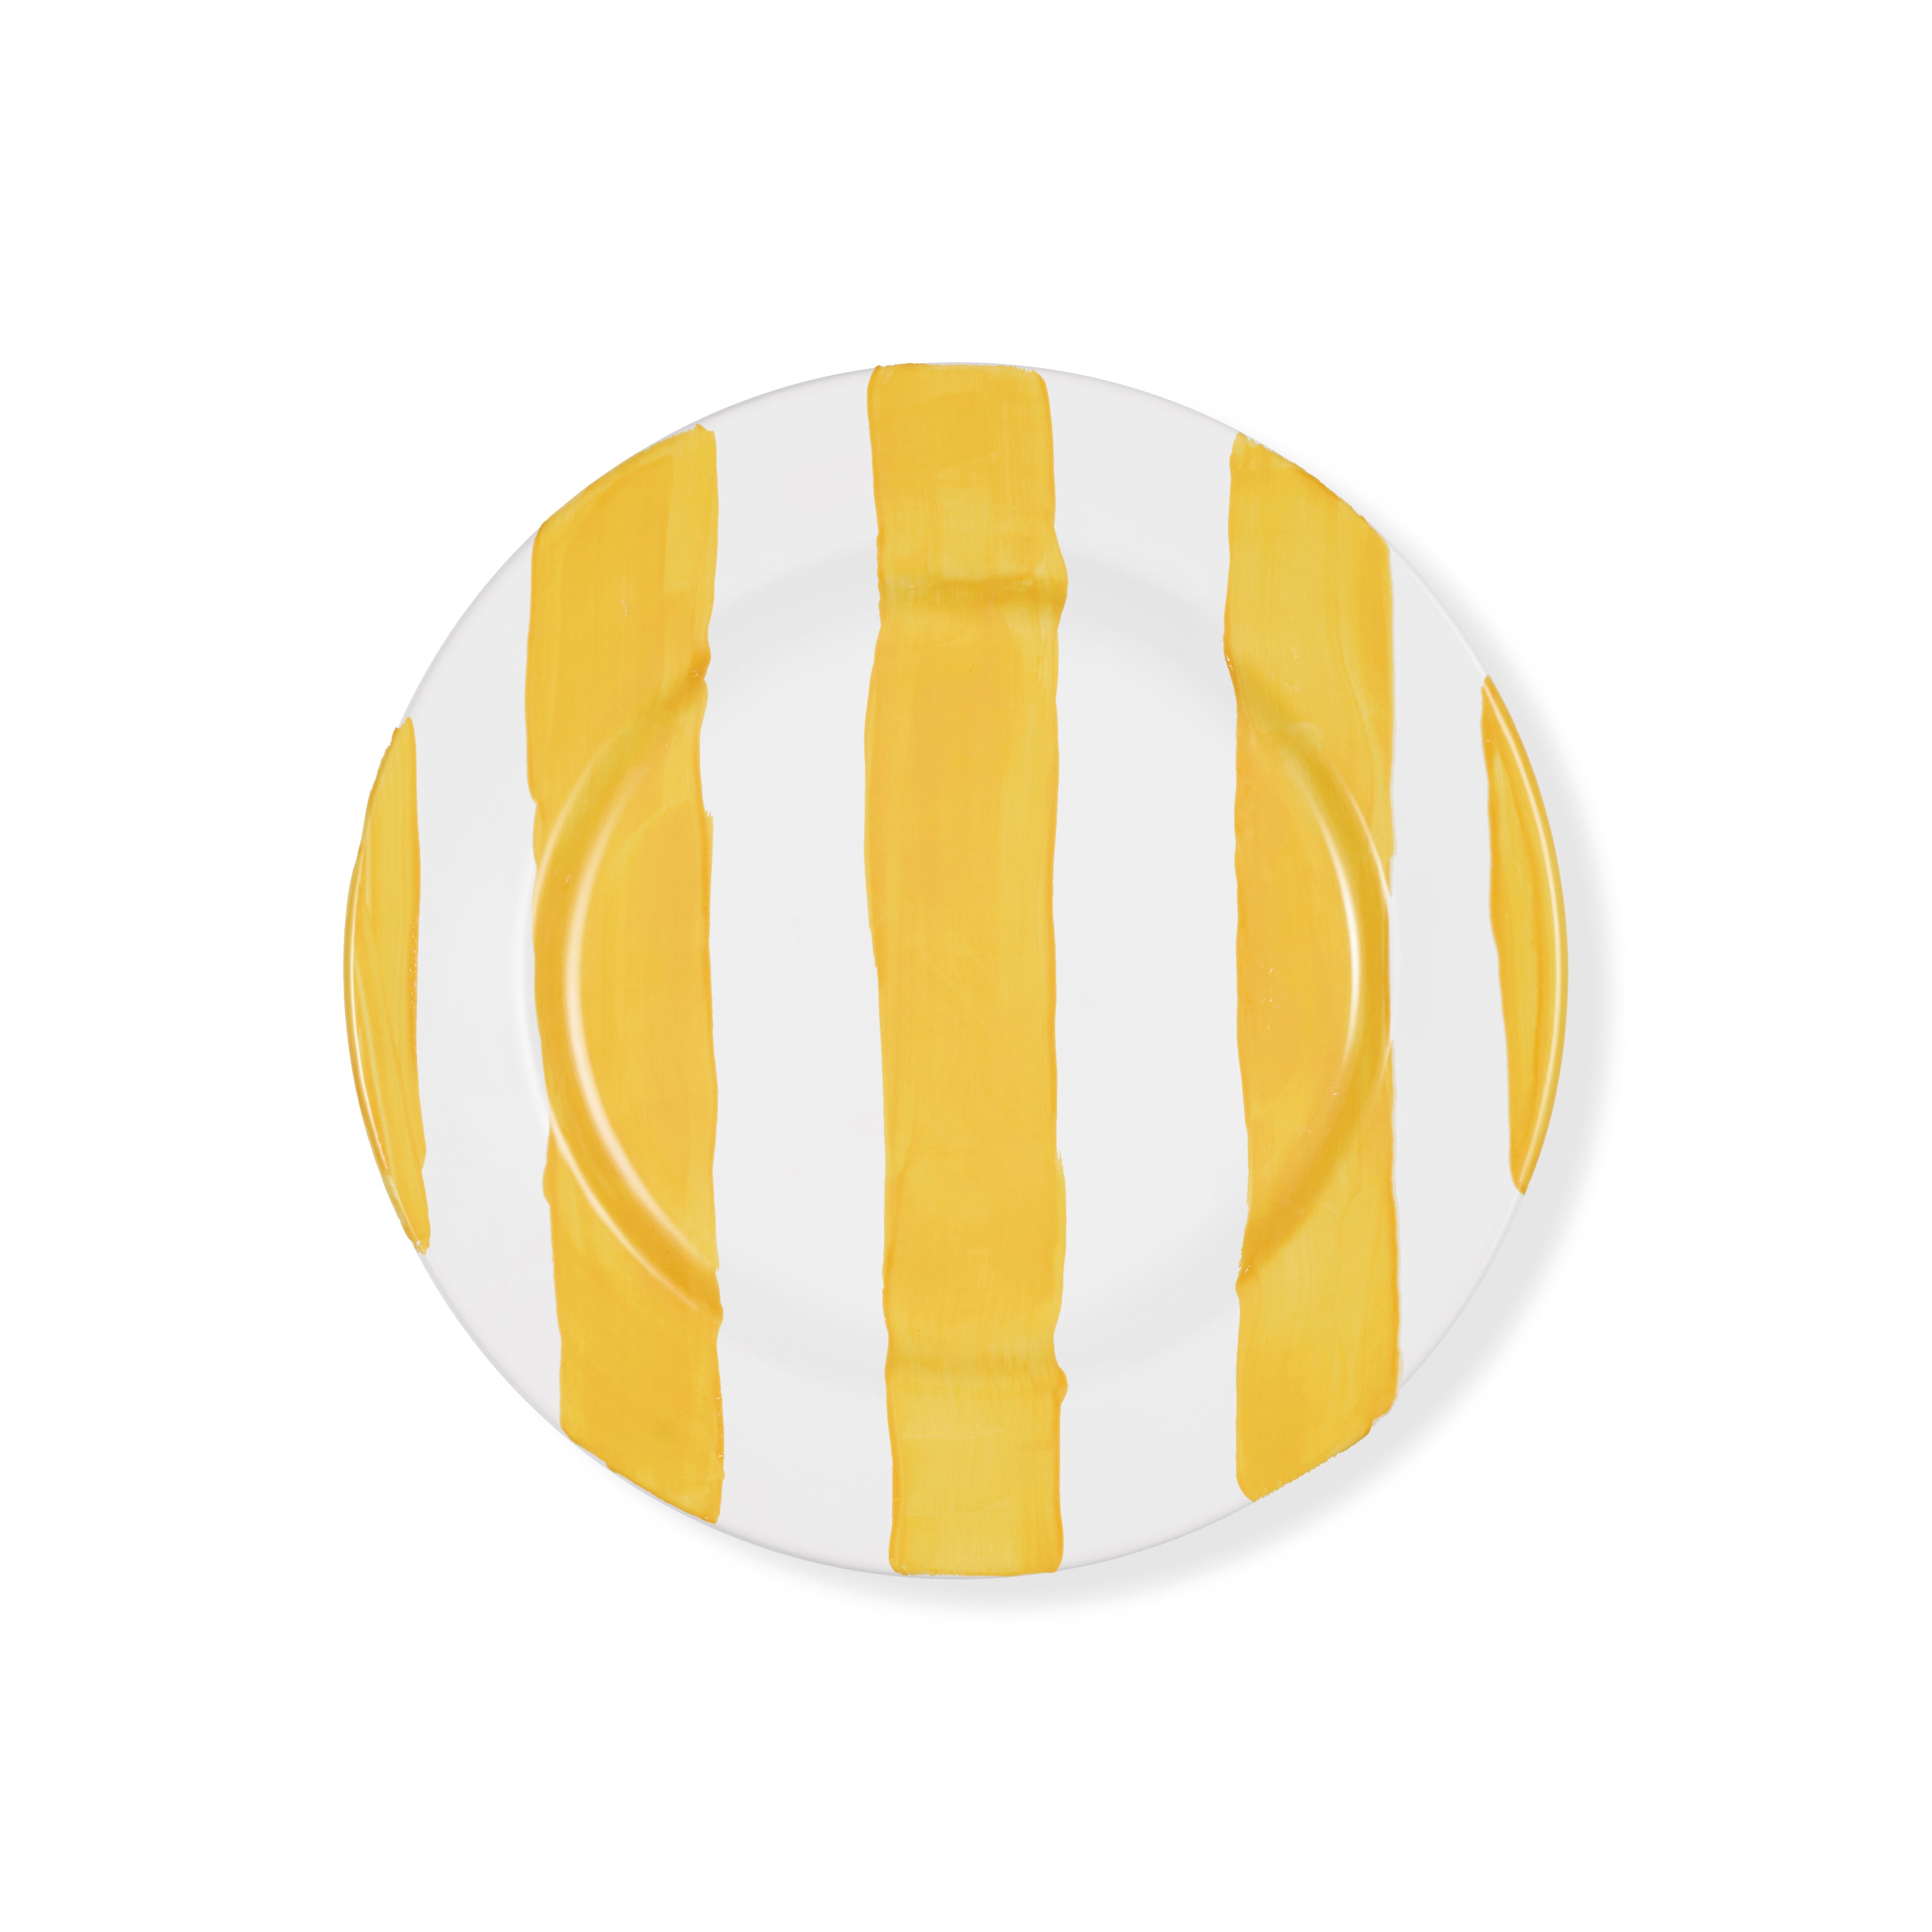 S&B Classic Stripe Pasta Bowl in Yellow and White